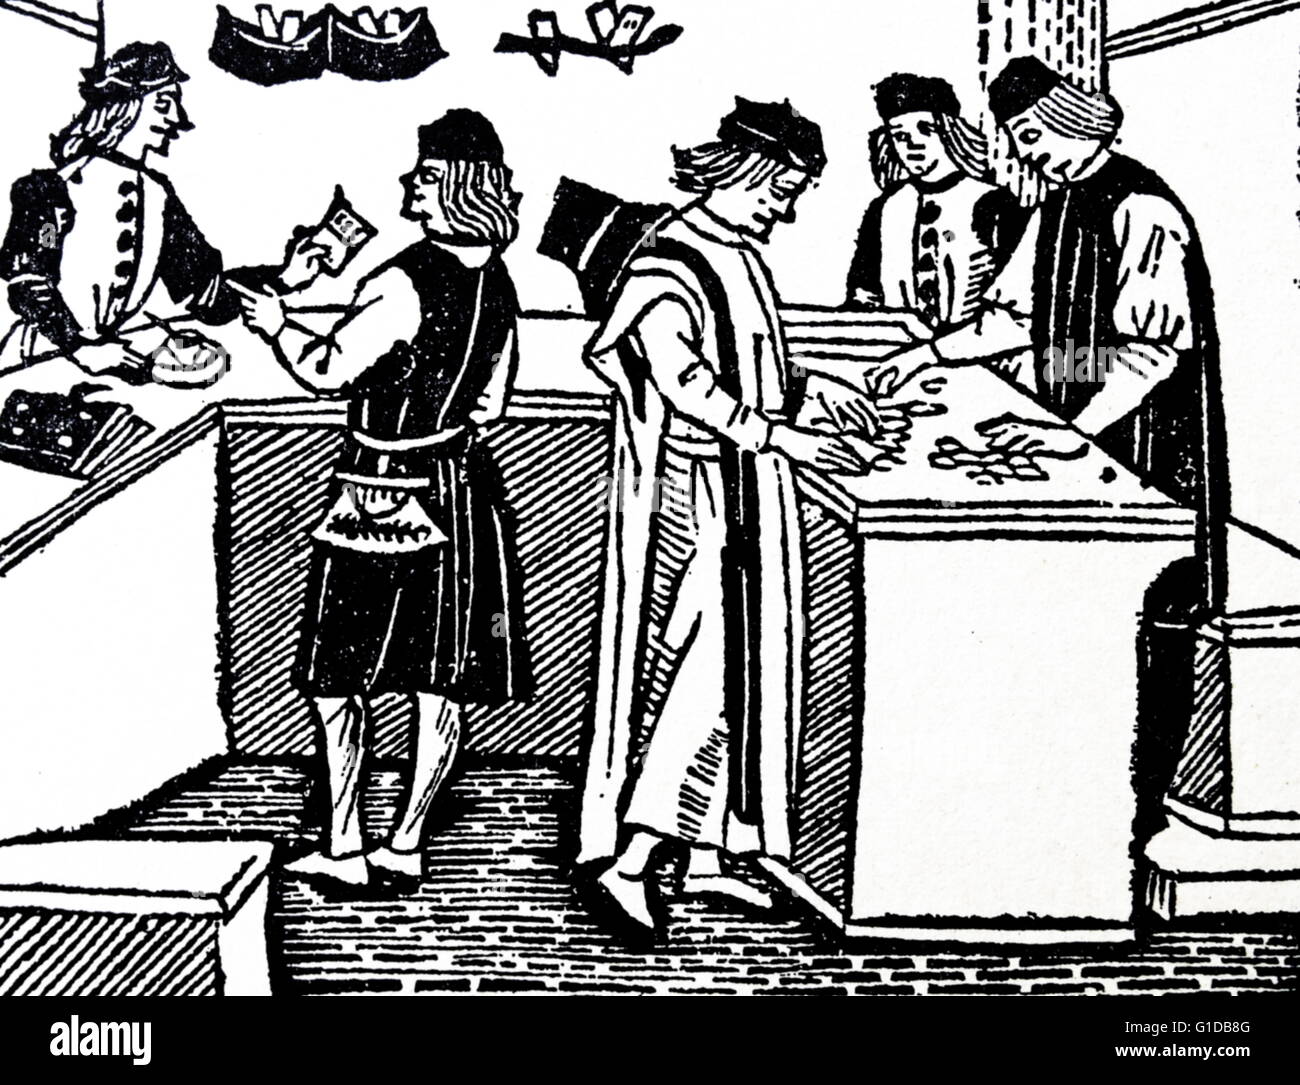 Woodcut depicting bankers from a 15th Century tract Stock Photo